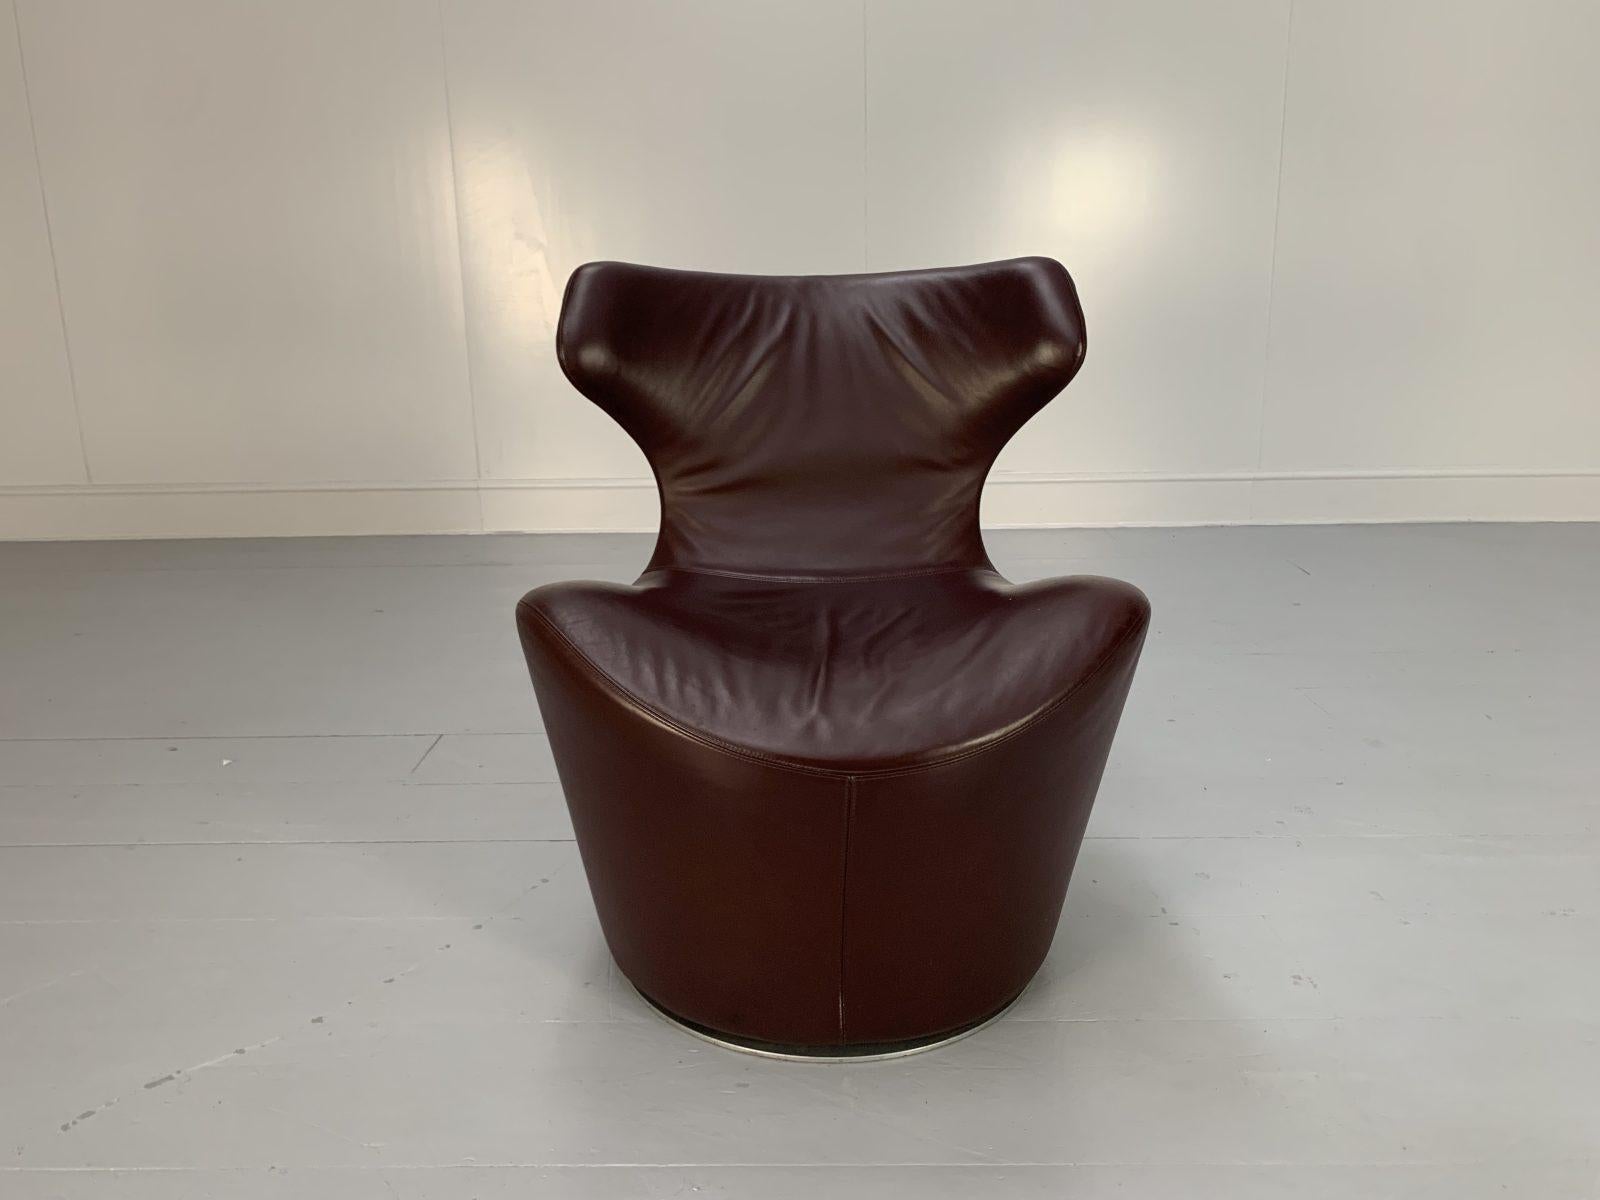 Hello Friends, and welcome to another unmissable offering from Lord Browns Furniture, the UK’s premier resource for fine Sofas and Chairs.

On offer on this occasion is a rare, superb “Mini Papilio” swivel-armchair, from the world renown Italian